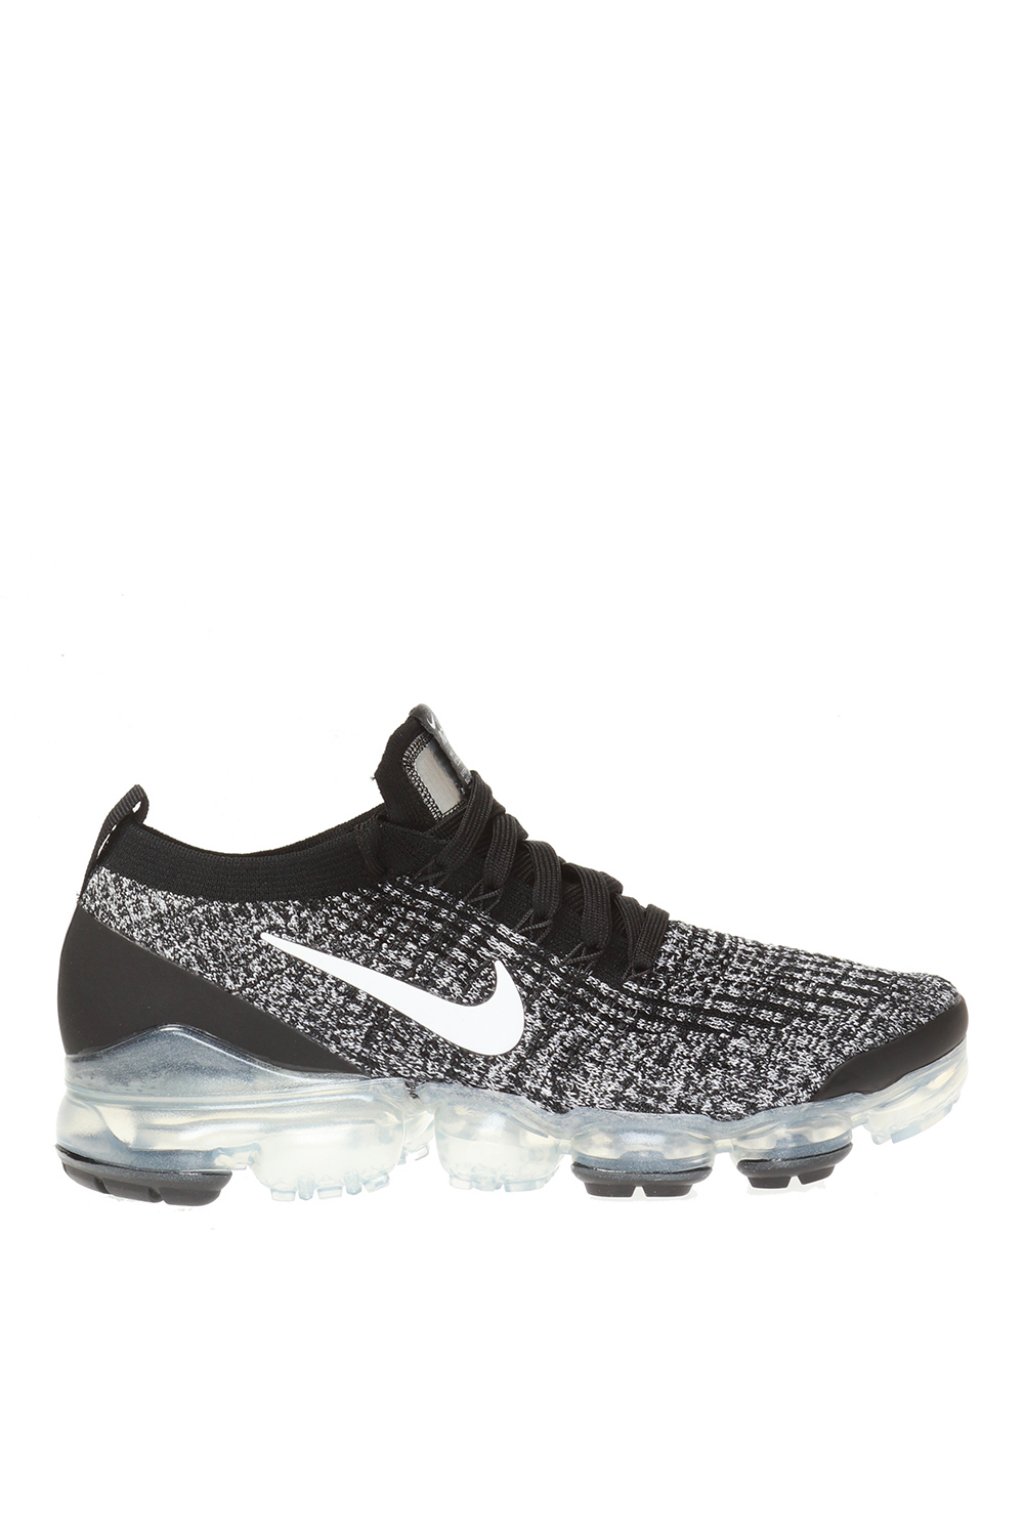 cleaning vapormax flyknit